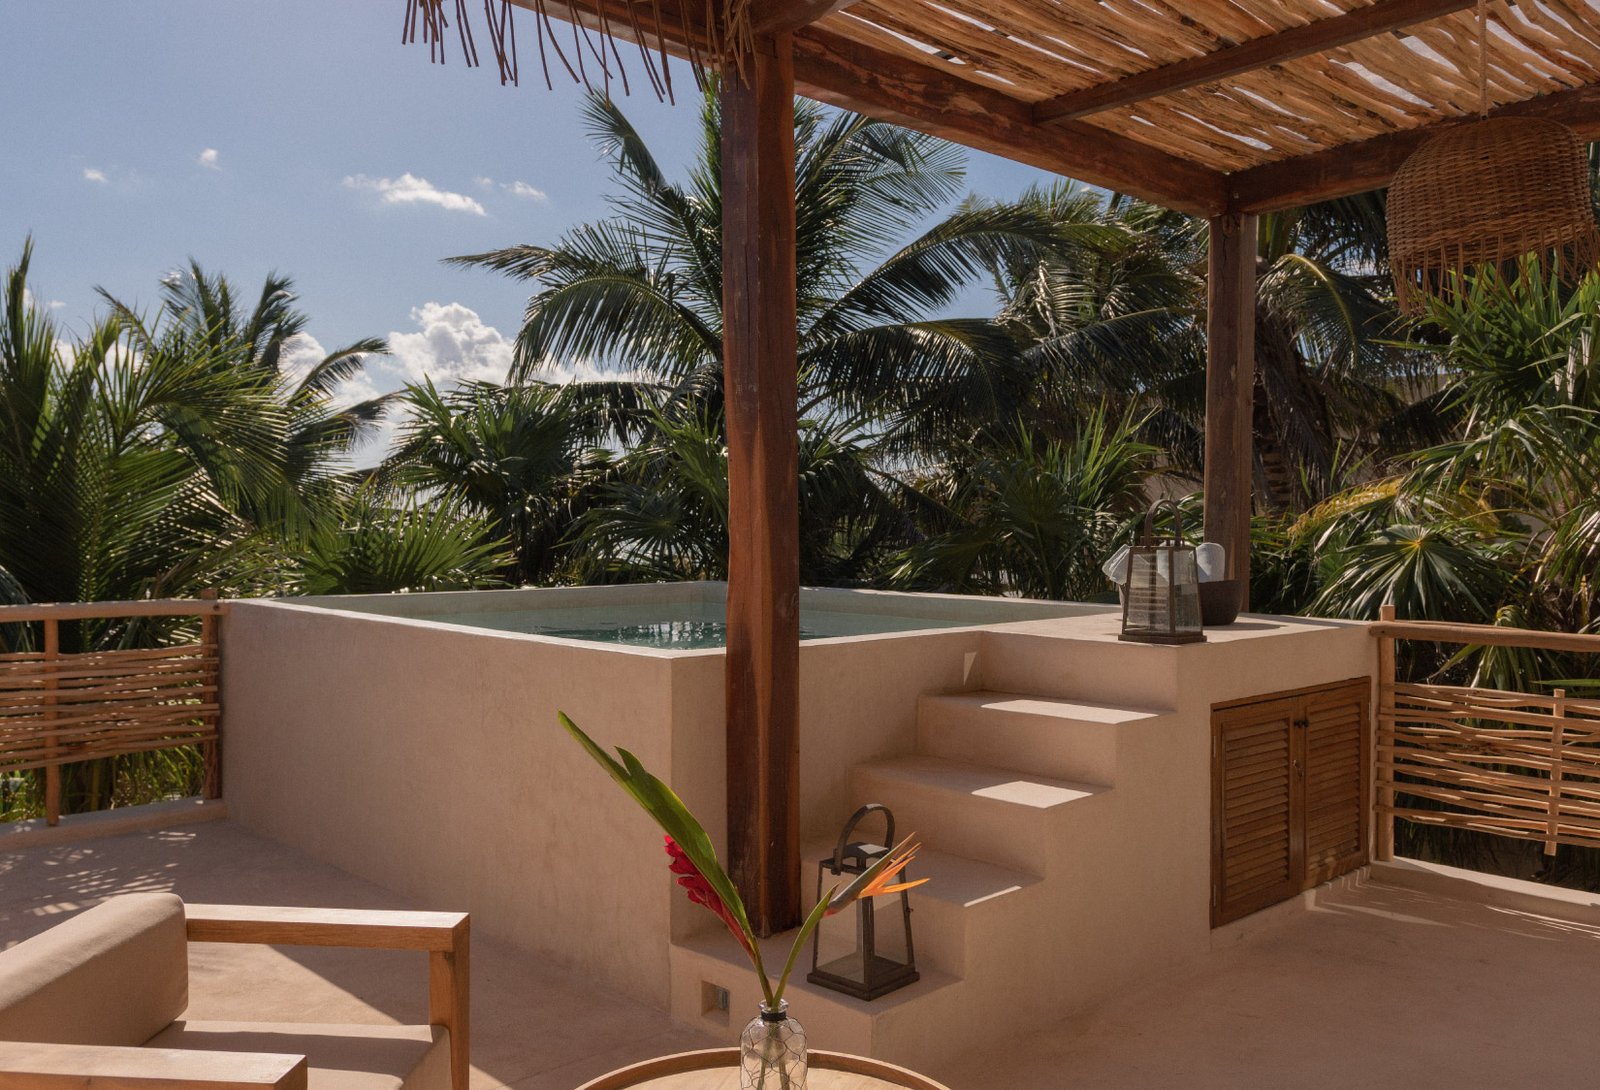 Beautiful pool with garden view on the terrace of the villa Chechén Suite in Tulum, Mexico